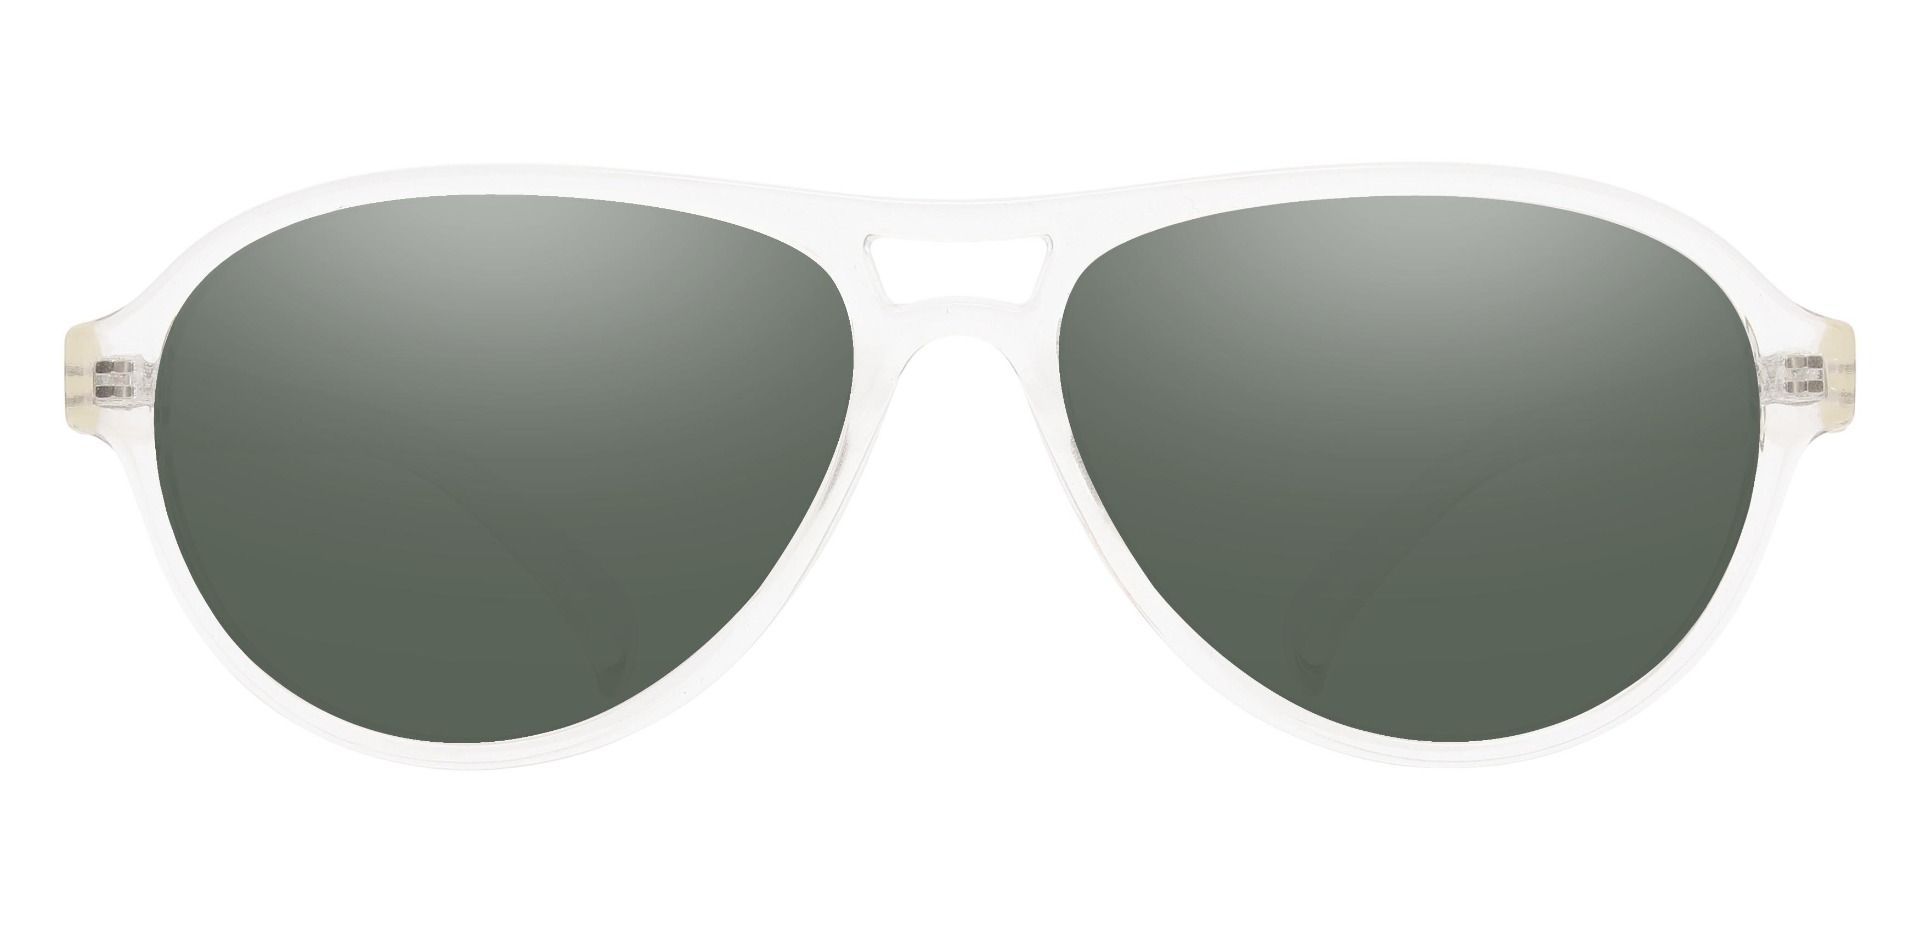 Cinema Aviator Reading Sunglasses - Clear Frame With Green Lenses